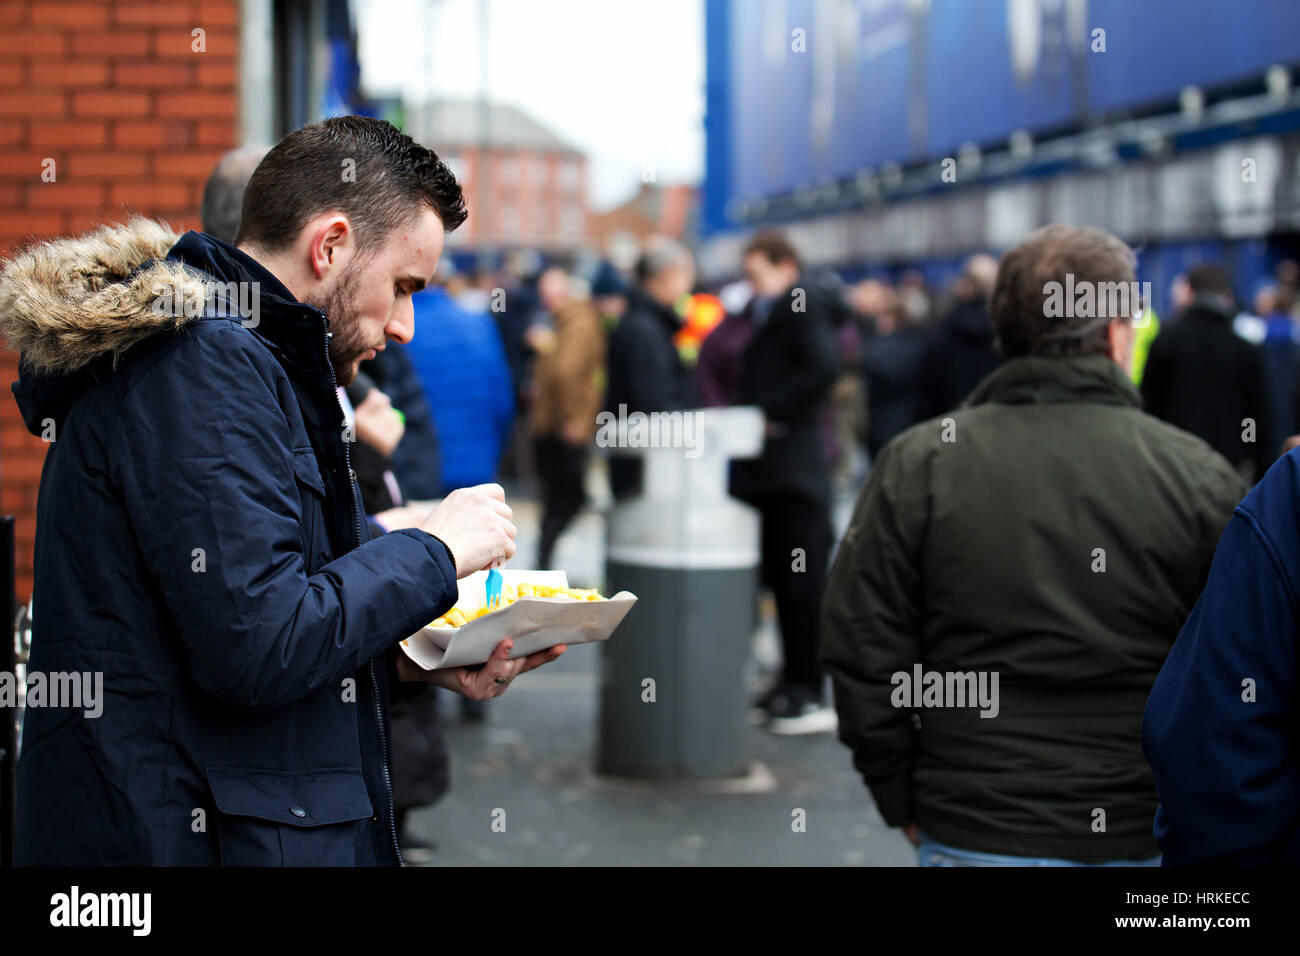 A man eating chips before going into Goodison Park for an Everton home match Stock Photo